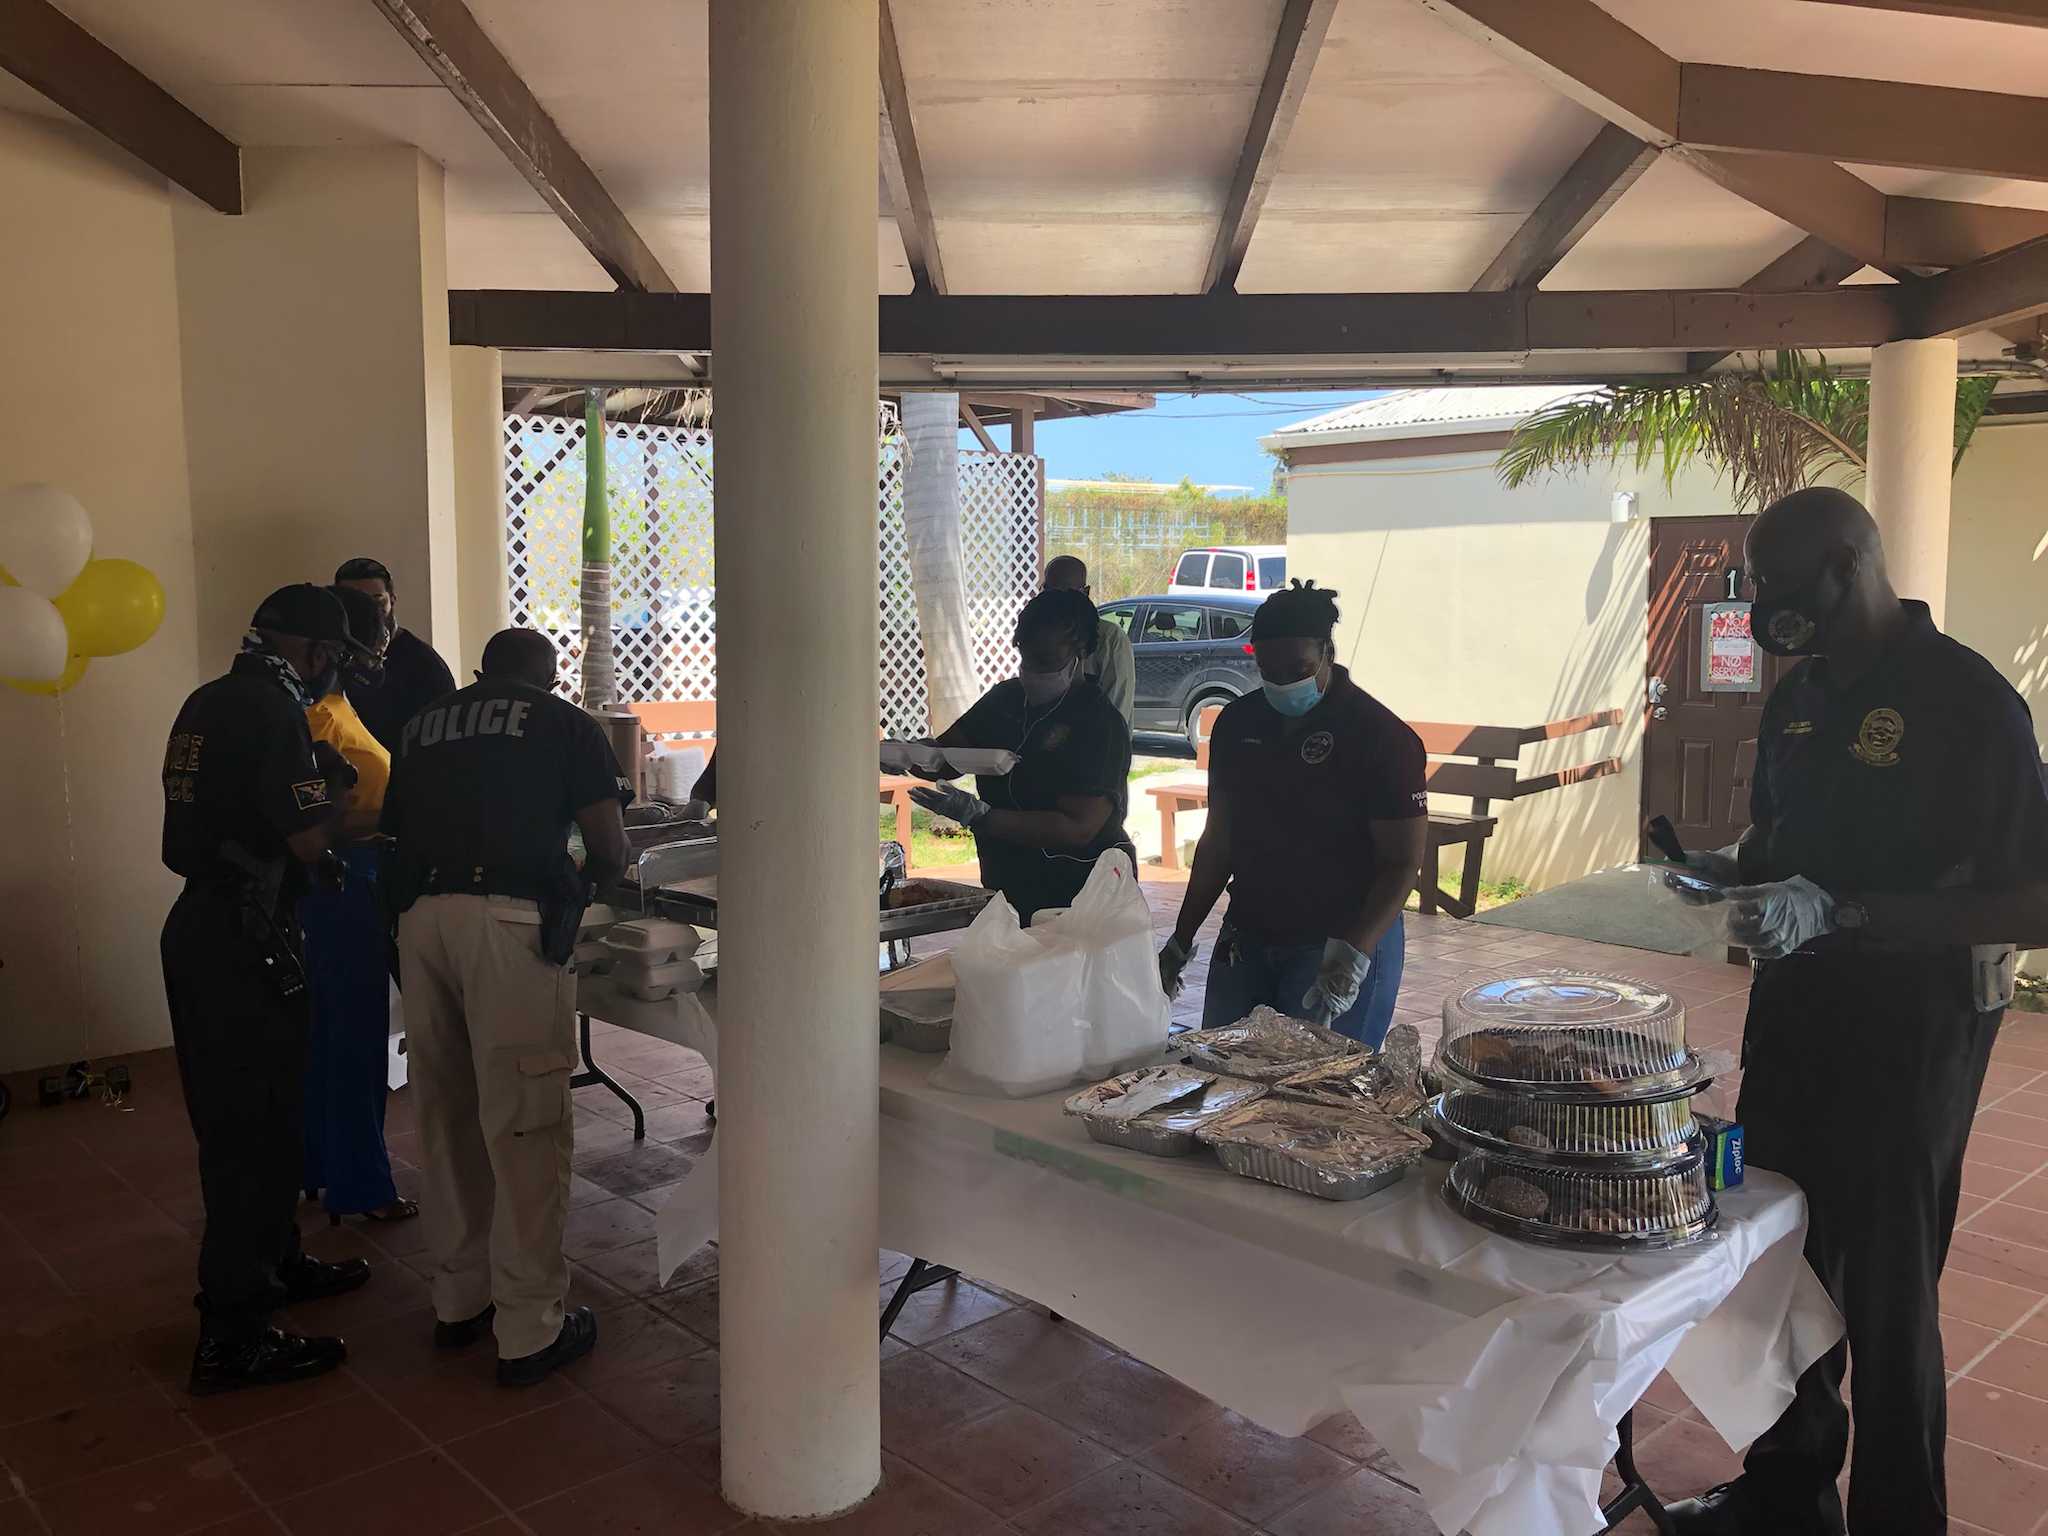 Police Observe Employee Appreciation Day 2021 With Banquet-Style Lunch Buffet In St. Croix On Friday: VIPD